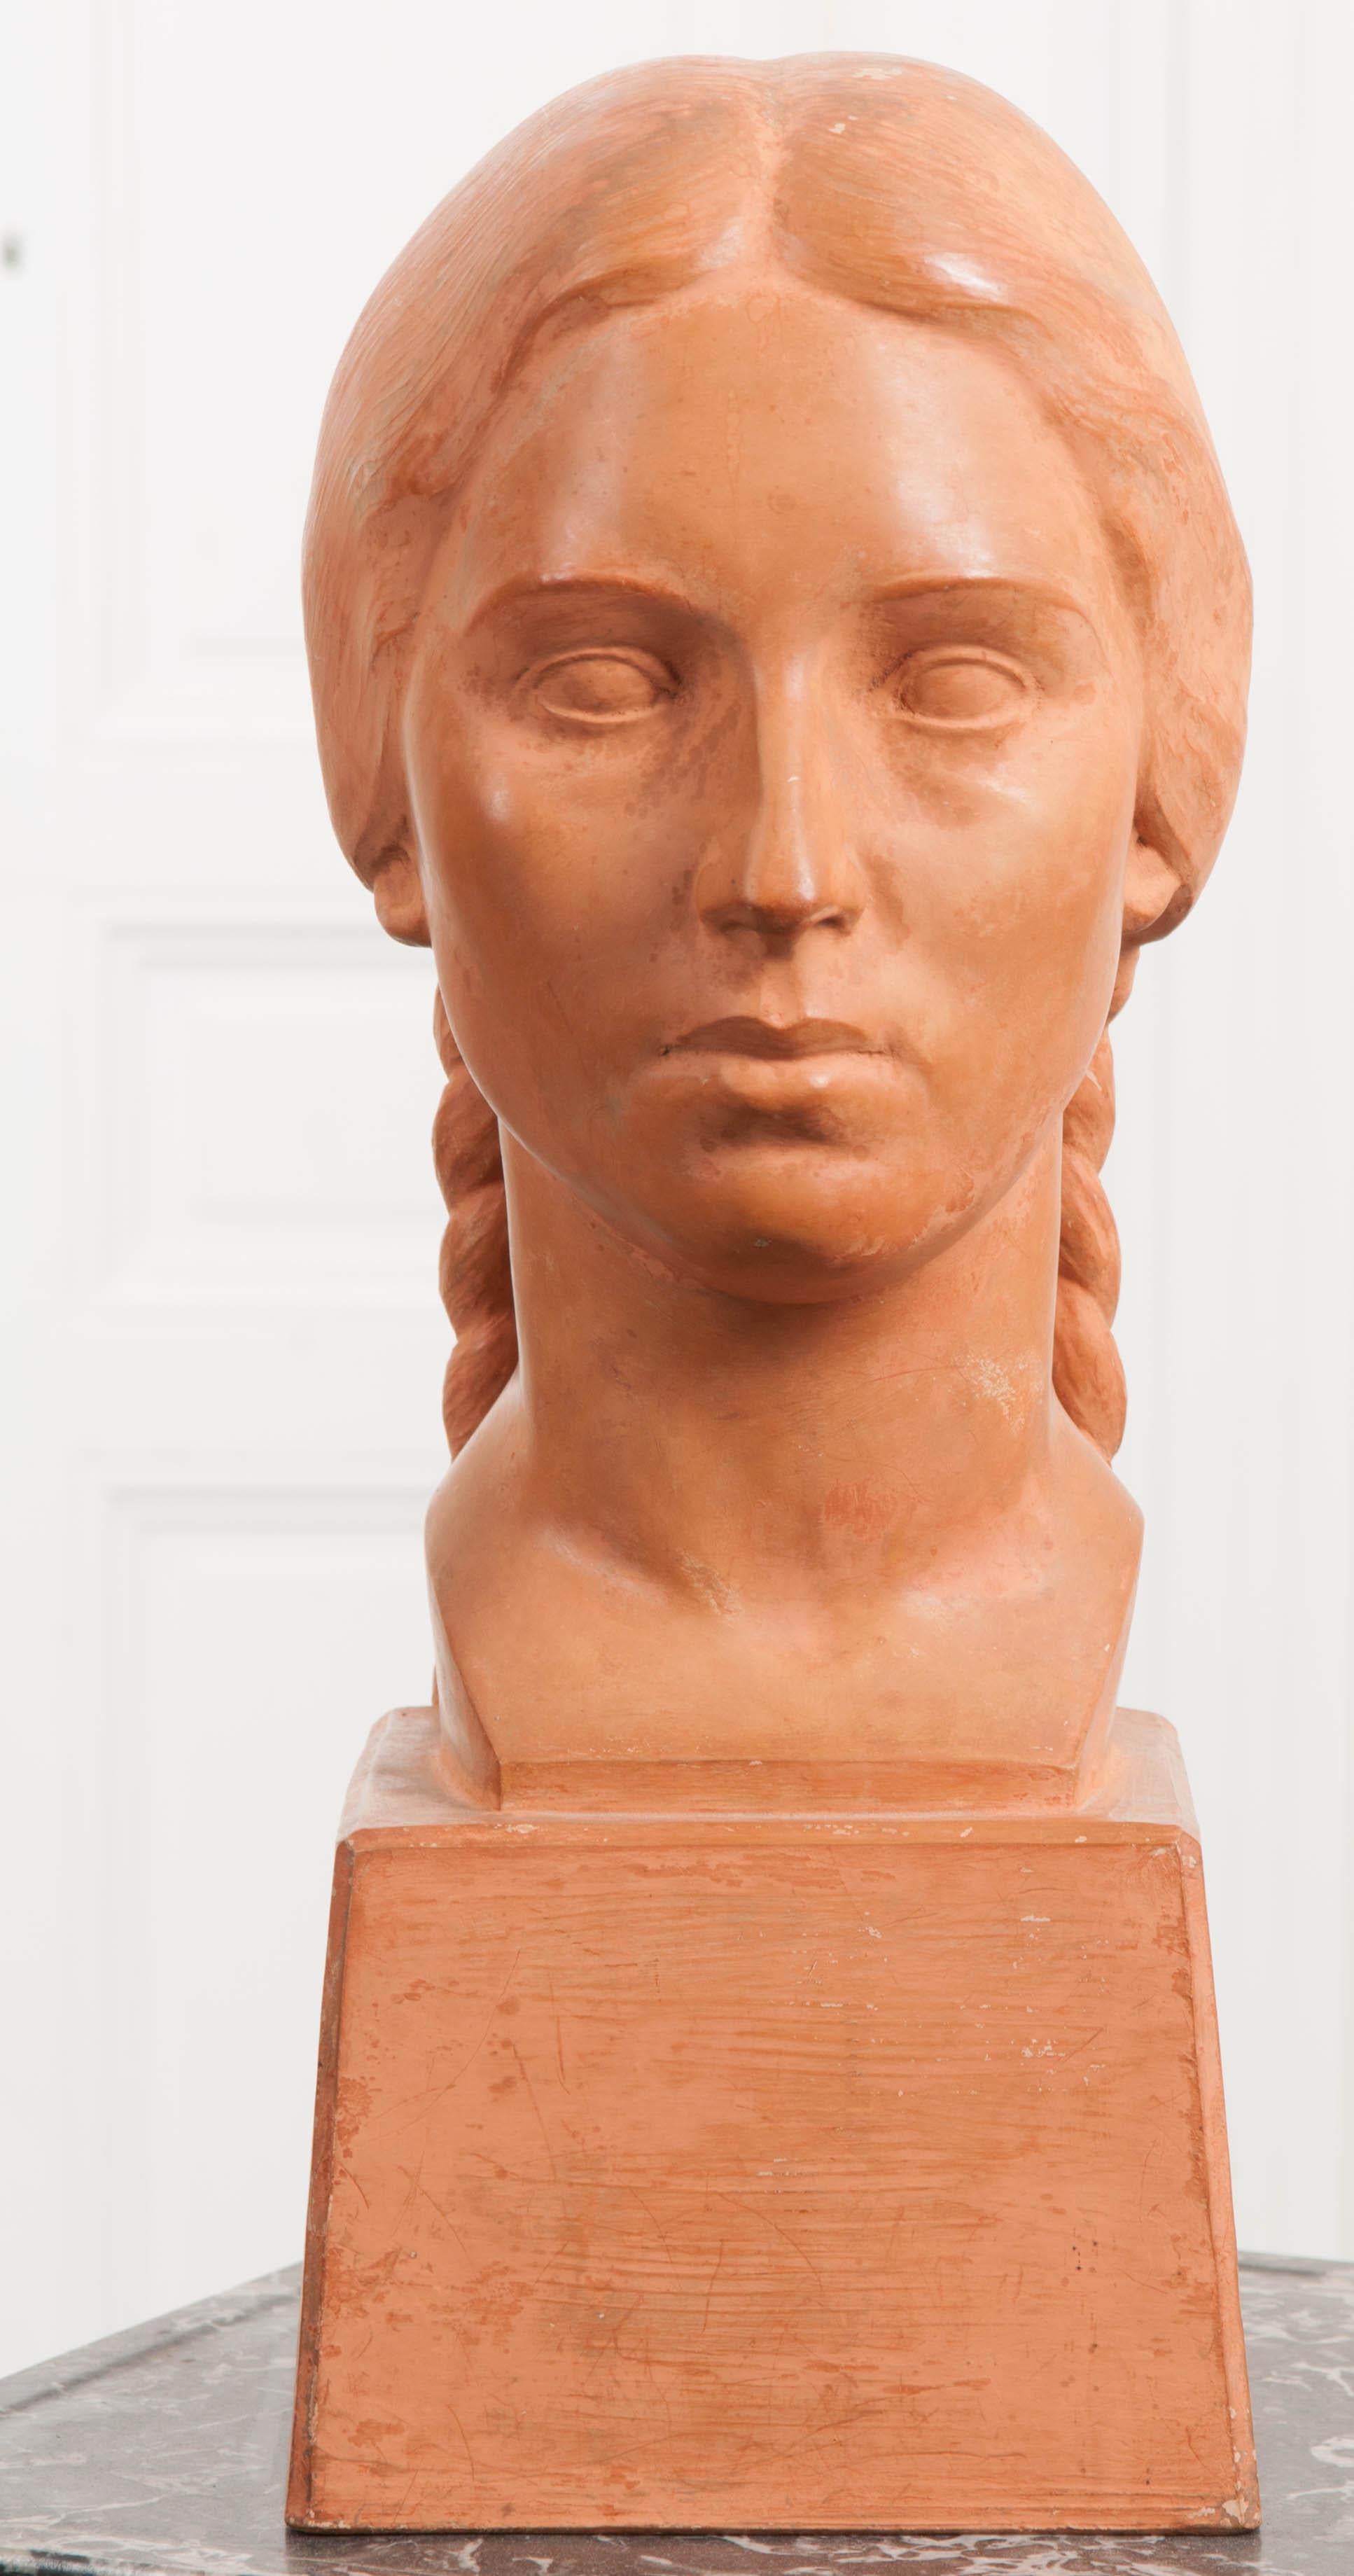 A distinguished terracotta bust from the early part of the 20th century. Made in France, the work depicts a female with long, braided pigtails and her hair parted down the center. An unemotional expression is worn on her face, now frozen in time.